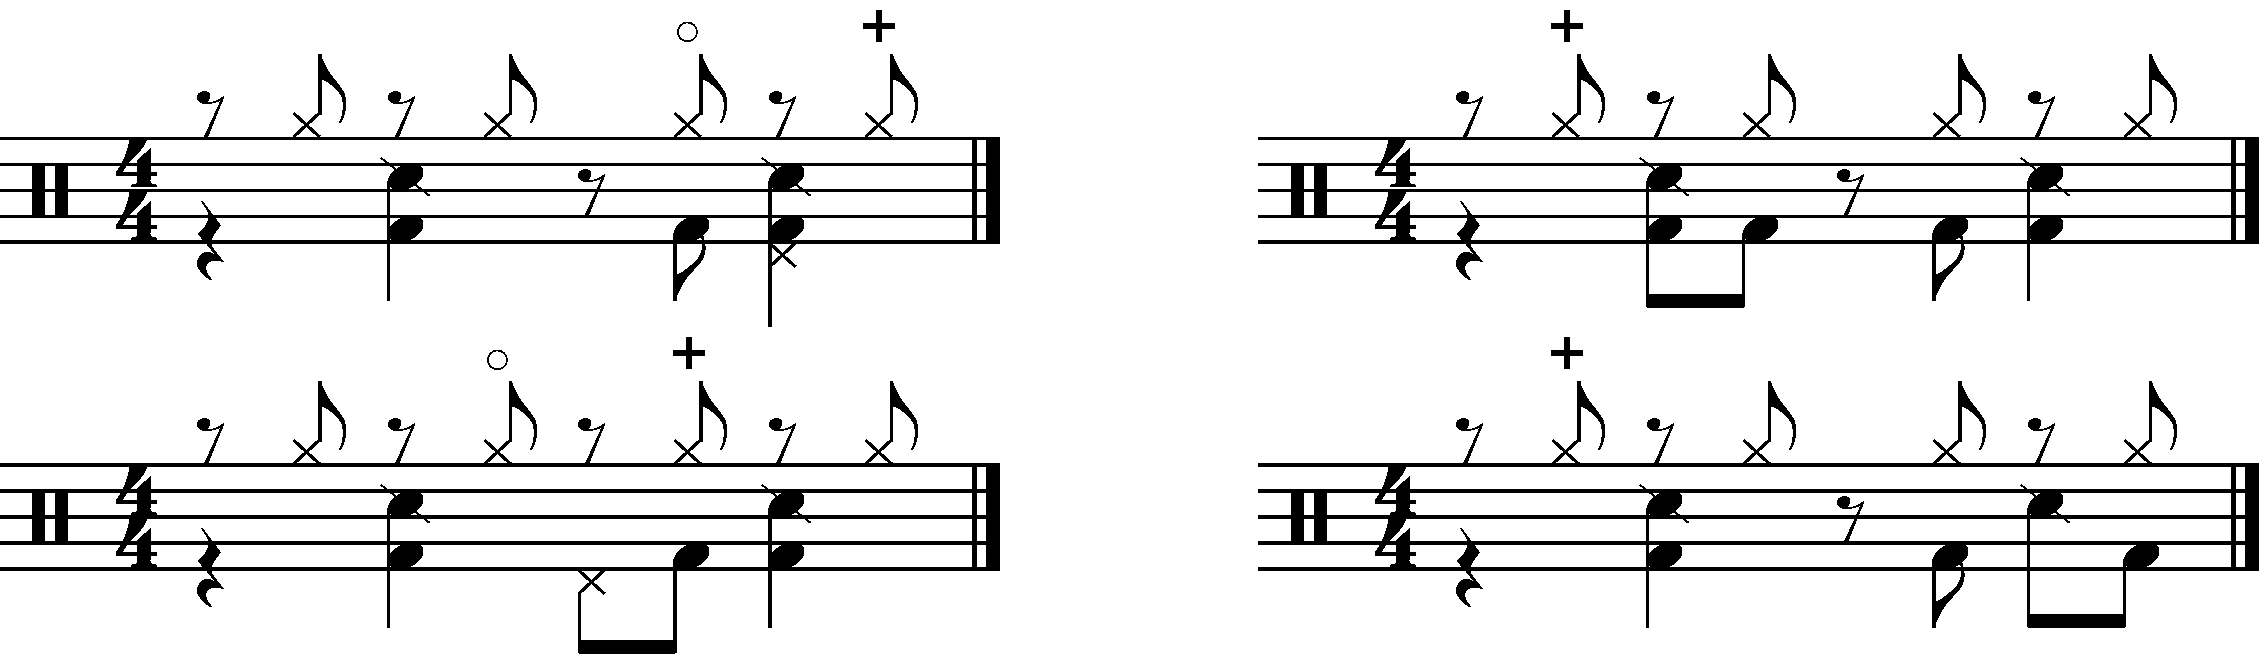 Four options for the 'B' section